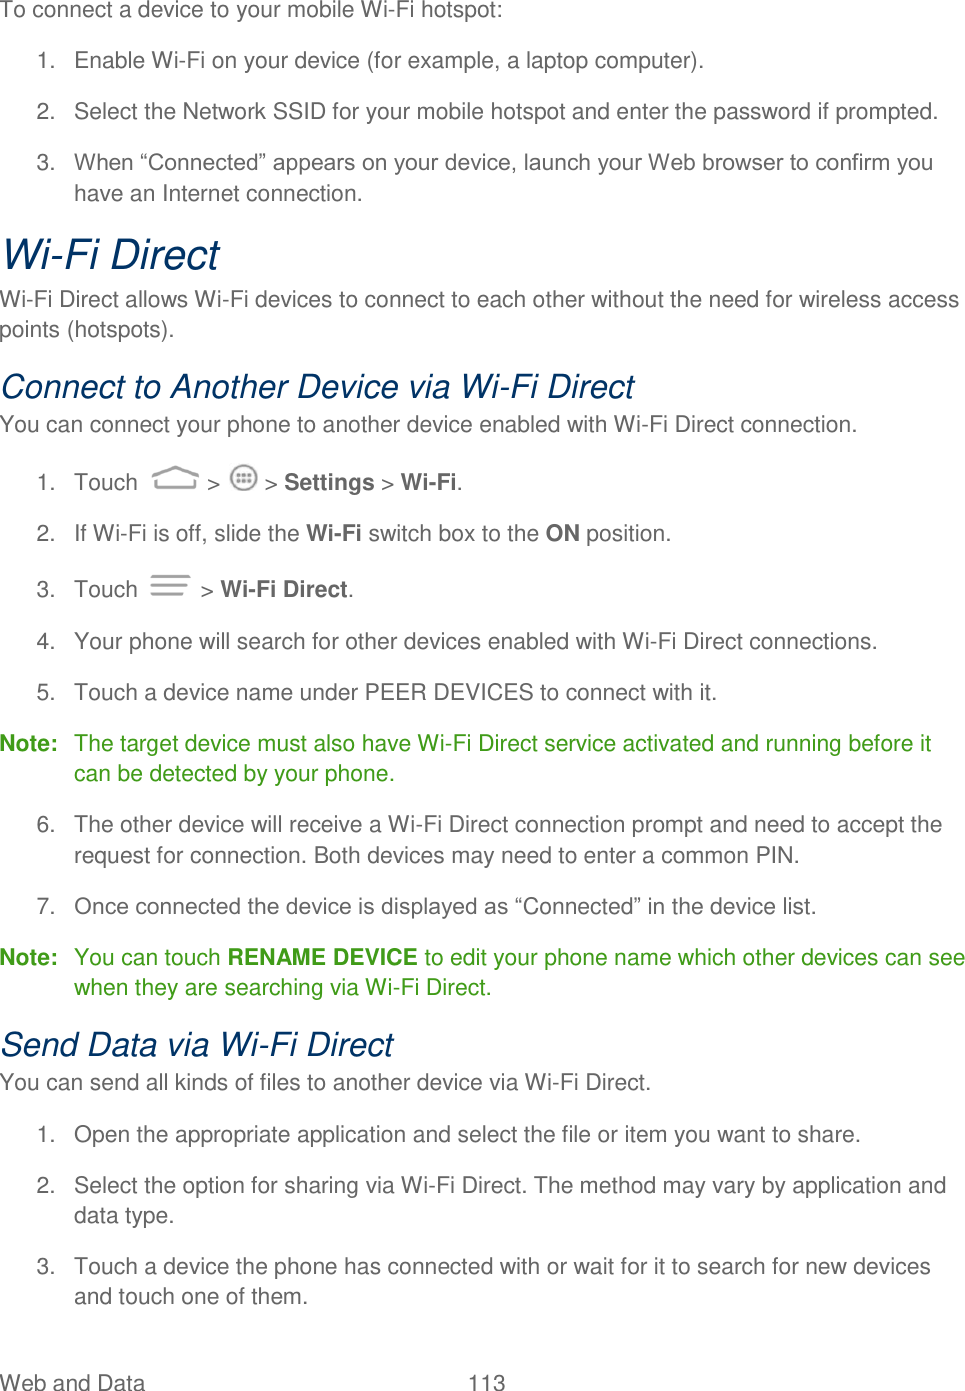 Web and Data  113   To connect a device to your mobile Wi-Fi hotspot: 1.  Enable Wi-Fi on your device (for example, a laptop computer). 2.  Select the Network SSID for your mobile hotspot and enter the password if prompted. 3. When “Connected” appears on your device, launch your Web browser to confirm you have an Internet connection. Wi-Fi Direct Wi-Fi Direct allows Wi-Fi devices to connect to each other without the need for wireless access points (hotspots). Connect to Another Device via Wi-Fi Direct You can connect your phone to another device enabled with Wi-Fi Direct connection. 1.  Touch   &gt;   &gt; Settings &gt; Wi-Fi. 2.  If Wi-Fi is off, slide the Wi-Fi switch box to the ON position. 3.  Touch   &gt; Wi-Fi Direct. 4.  Your phone will search for other devices enabled with Wi-Fi Direct connections.  5.  Touch a device name under PEER DEVICES to connect with it. Note:  The target device must also have Wi-Fi Direct service activated and running before it can be detected by your phone. 6.  The other device will receive a Wi-Fi Direct connection prompt and need to accept the request for connection. Both devices may need to enter a common PIN. 7. Once connected the device is displayed as “Connected” in the device list. Note:  You can touch RENAME DEVICE to edit your phone name which other devices can see when they are searching via Wi-Fi Direct. Send Data via Wi-Fi Direct You can send all kinds of files to another device via Wi-Fi Direct. 1.  Open the appropriate application and select the file or item you want to share. 2.  Select the option for sharing via Wi-Fi Direct. The method may vary by application and data type. 3.  Touch a device the phone has connected with or wait for it to search for new devices and touch one of them. 